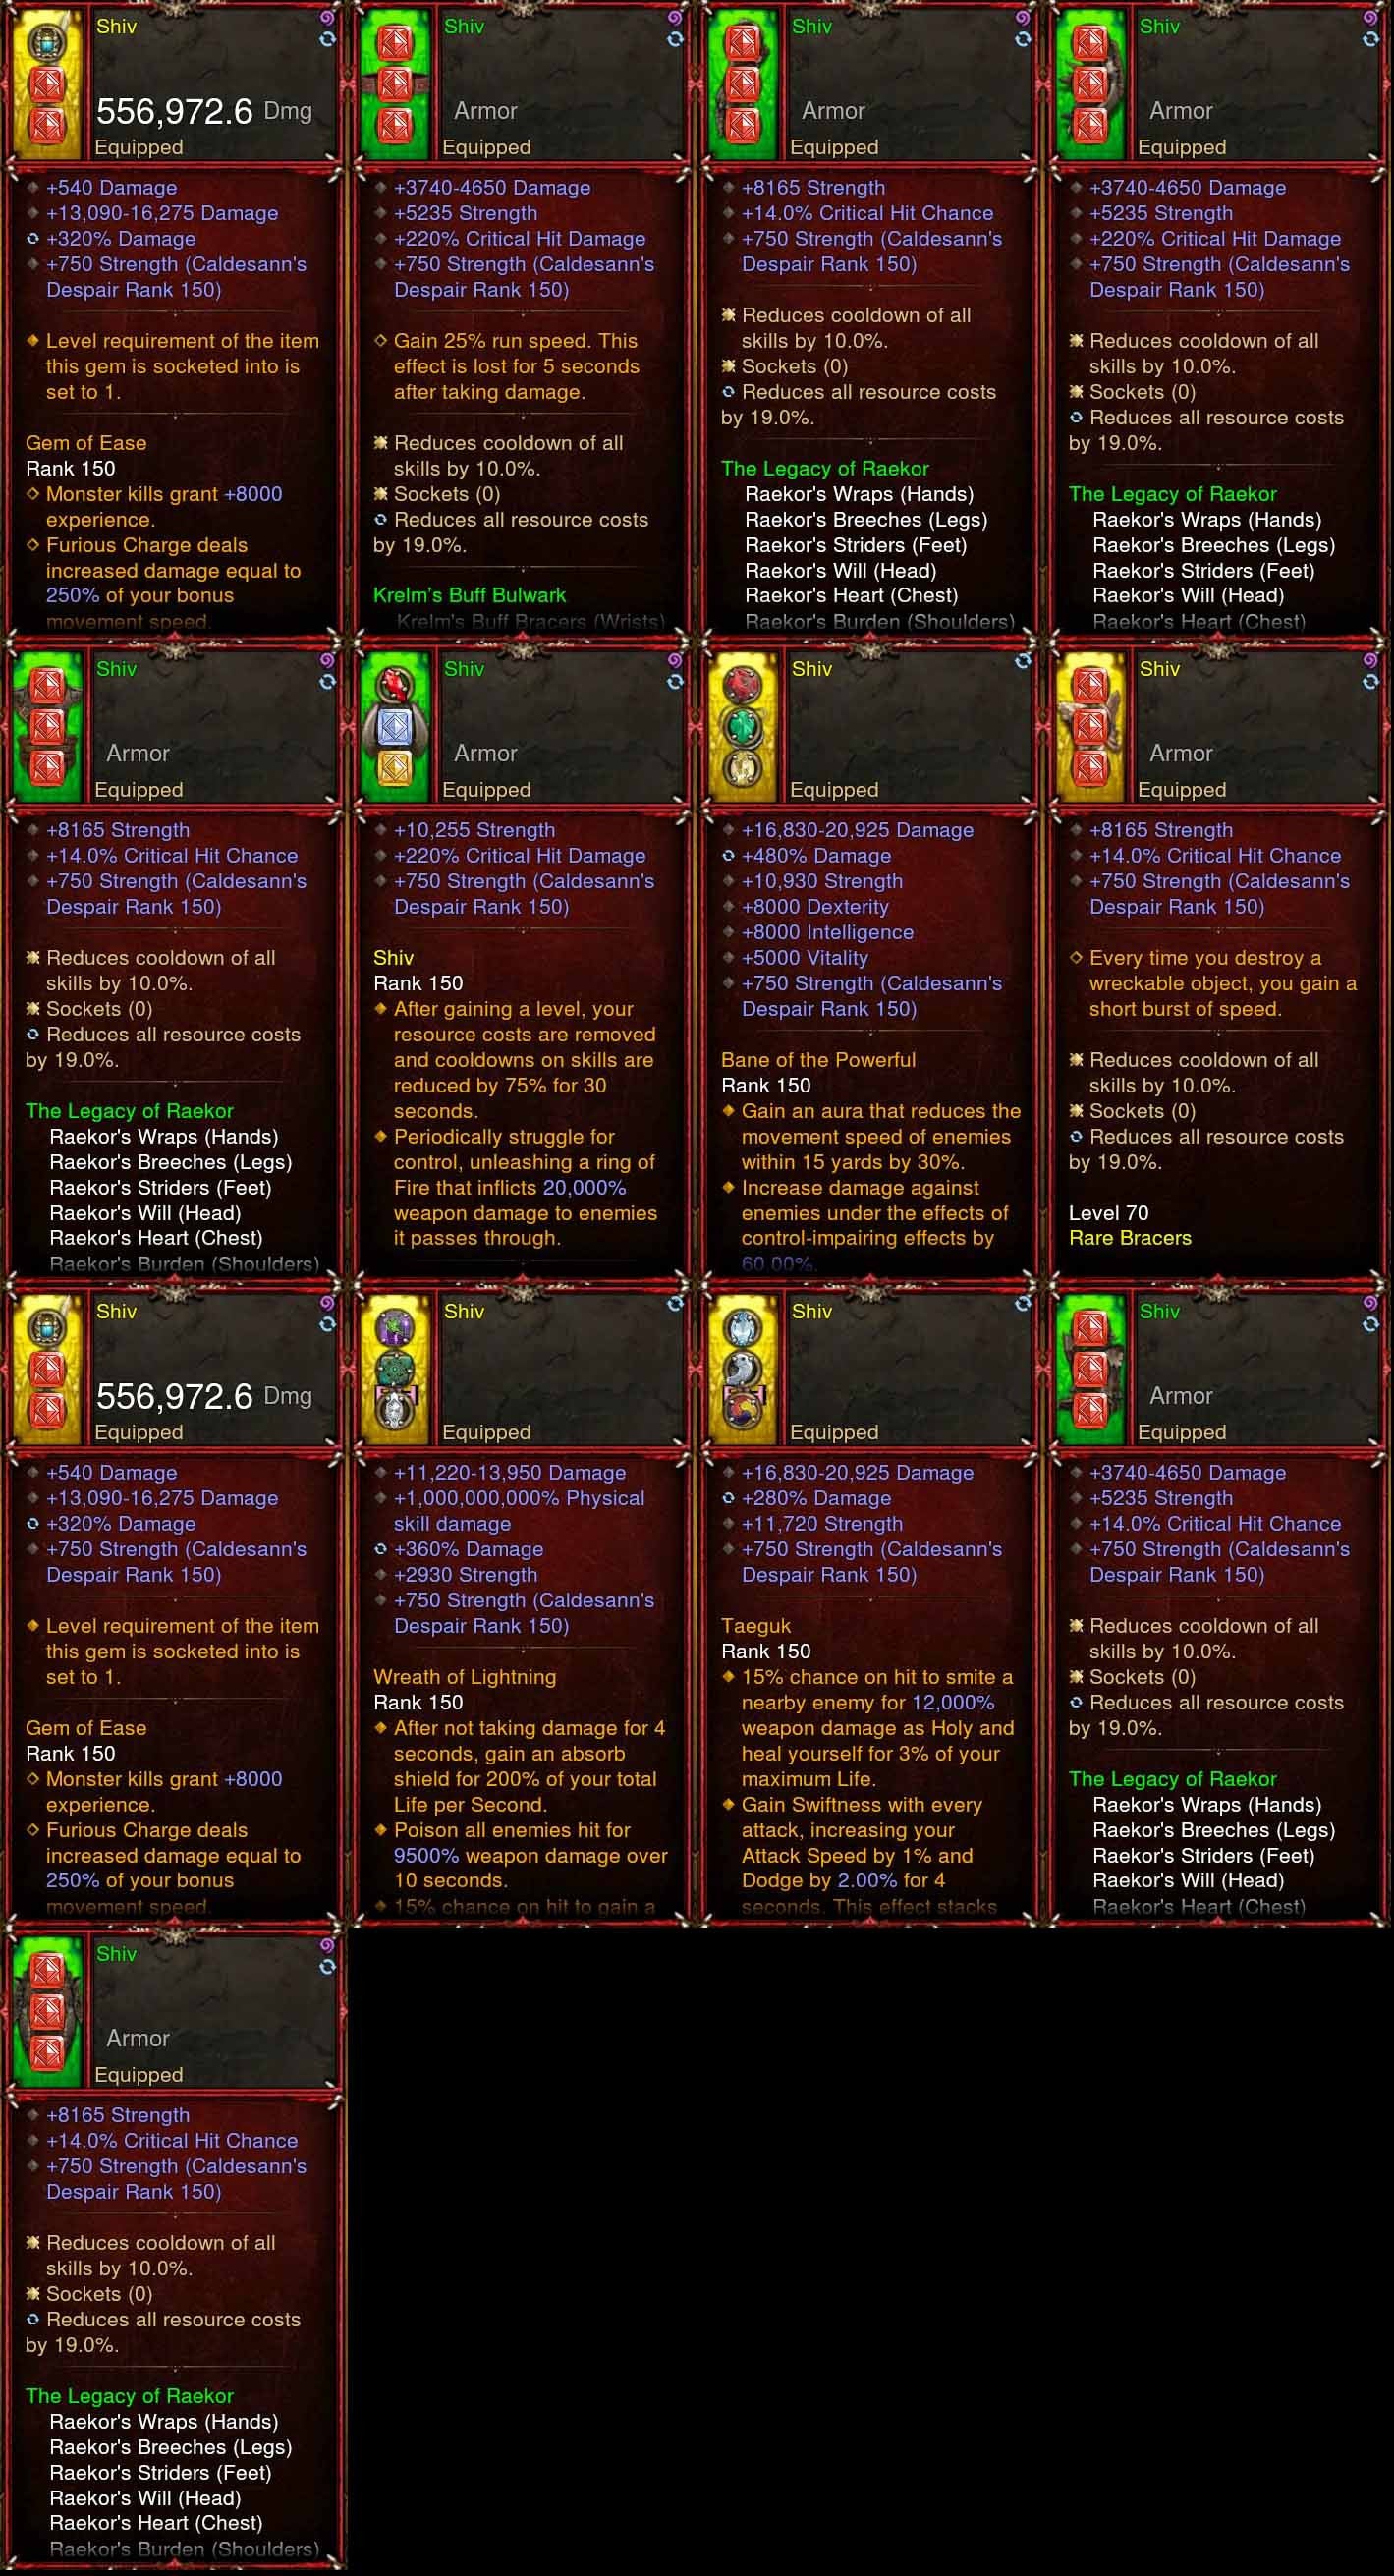 [Primal Ancient] [Quad DPS] Diablo 3 Immortal v5 Raekors Barbarian Shiv Diablo 3 Mods ROS Seasonal and Non Seasonal Save Mod - Modded Items and Gear - Hacks - Cheats - Trainers for Playstation 4 - Playstation 5 - Nintendo Switch - Xbox One